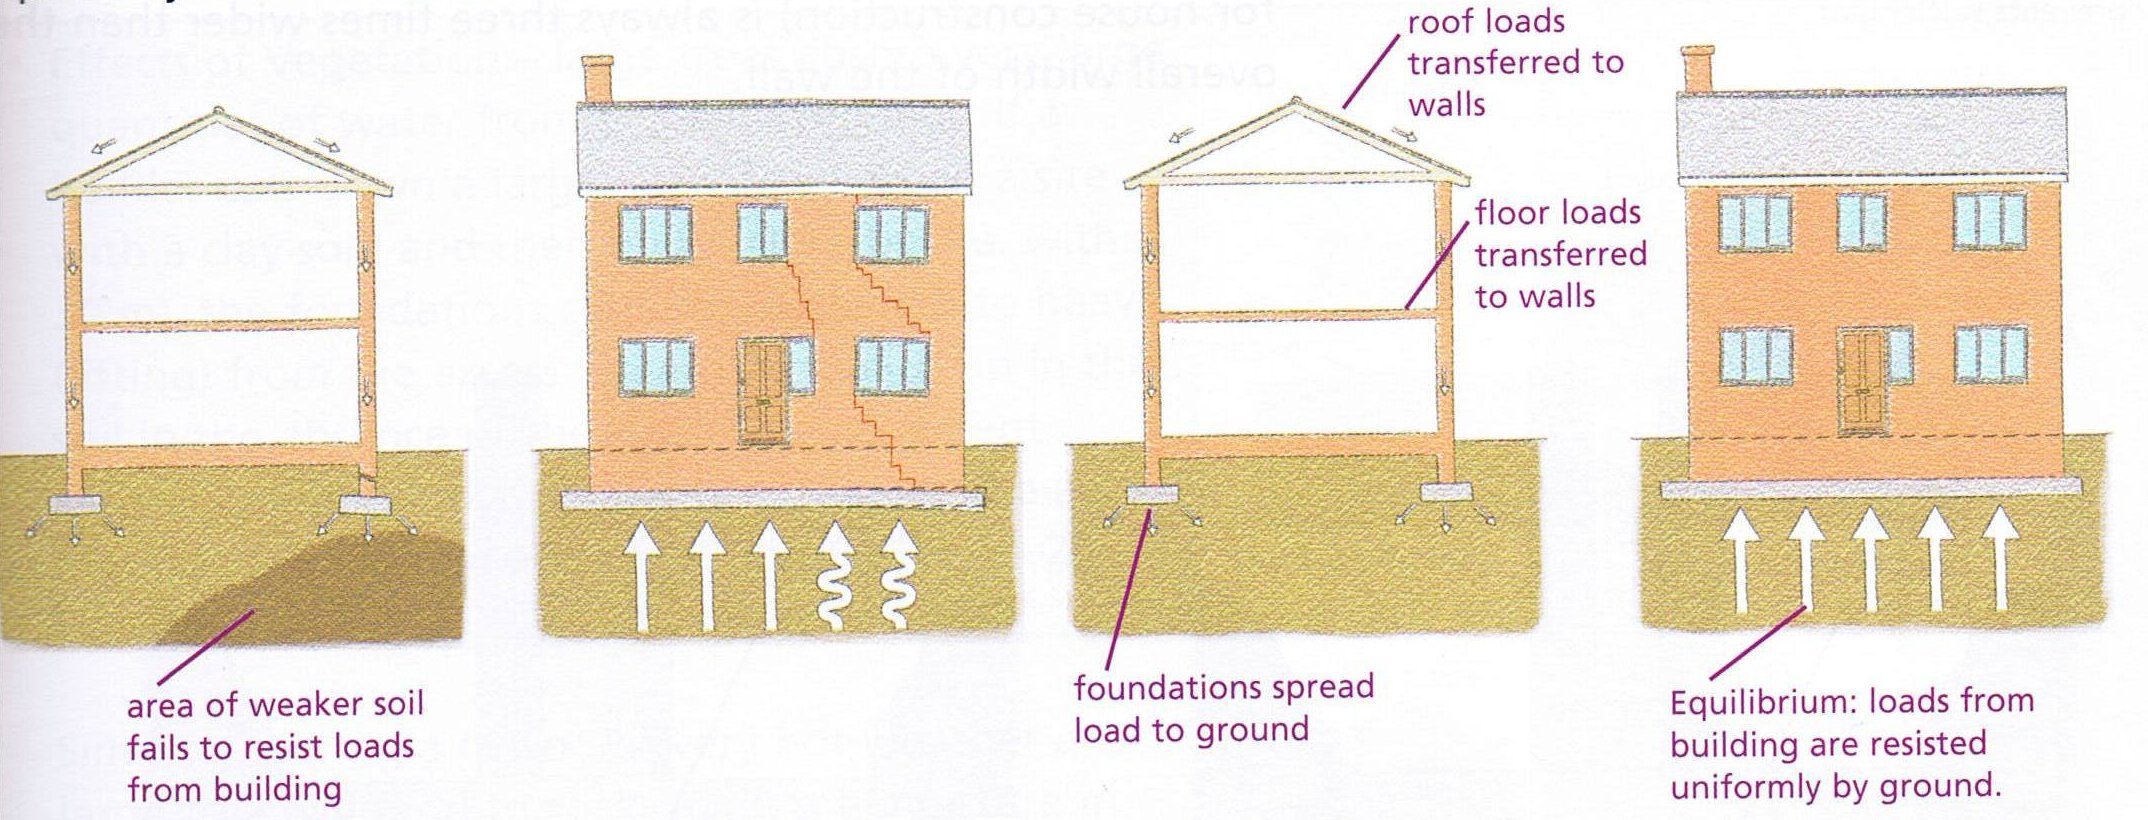 Foundations differential settlement will occur if an area of softer soil is